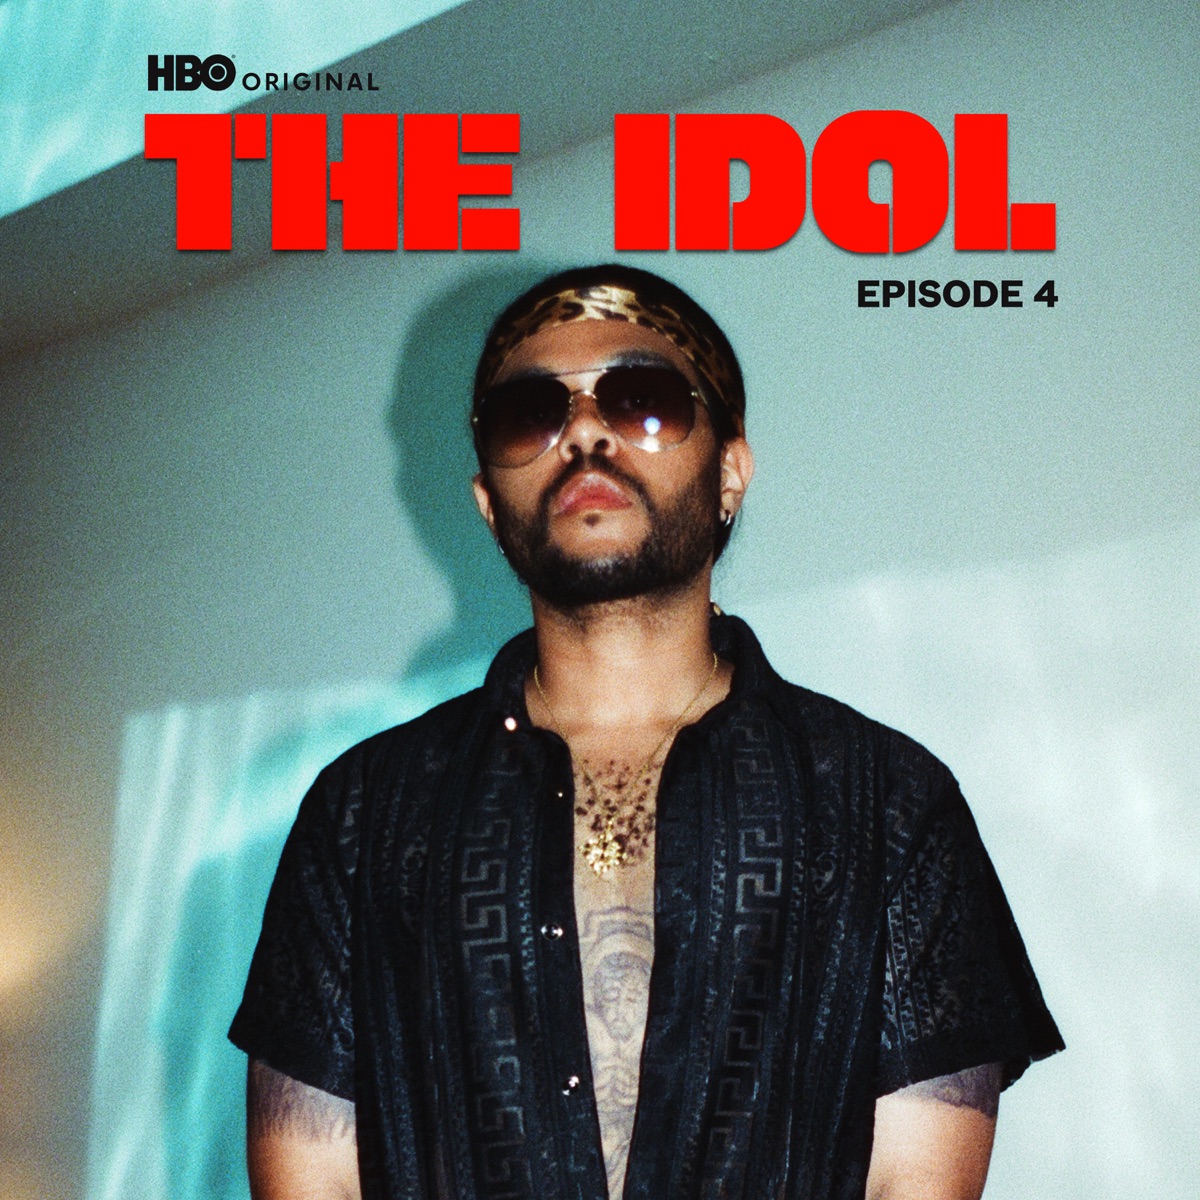 The Weeknd, JENNIE, Lily Rose Depp – The Idol Episode 4 (Music from the HBO Original Series) – Single